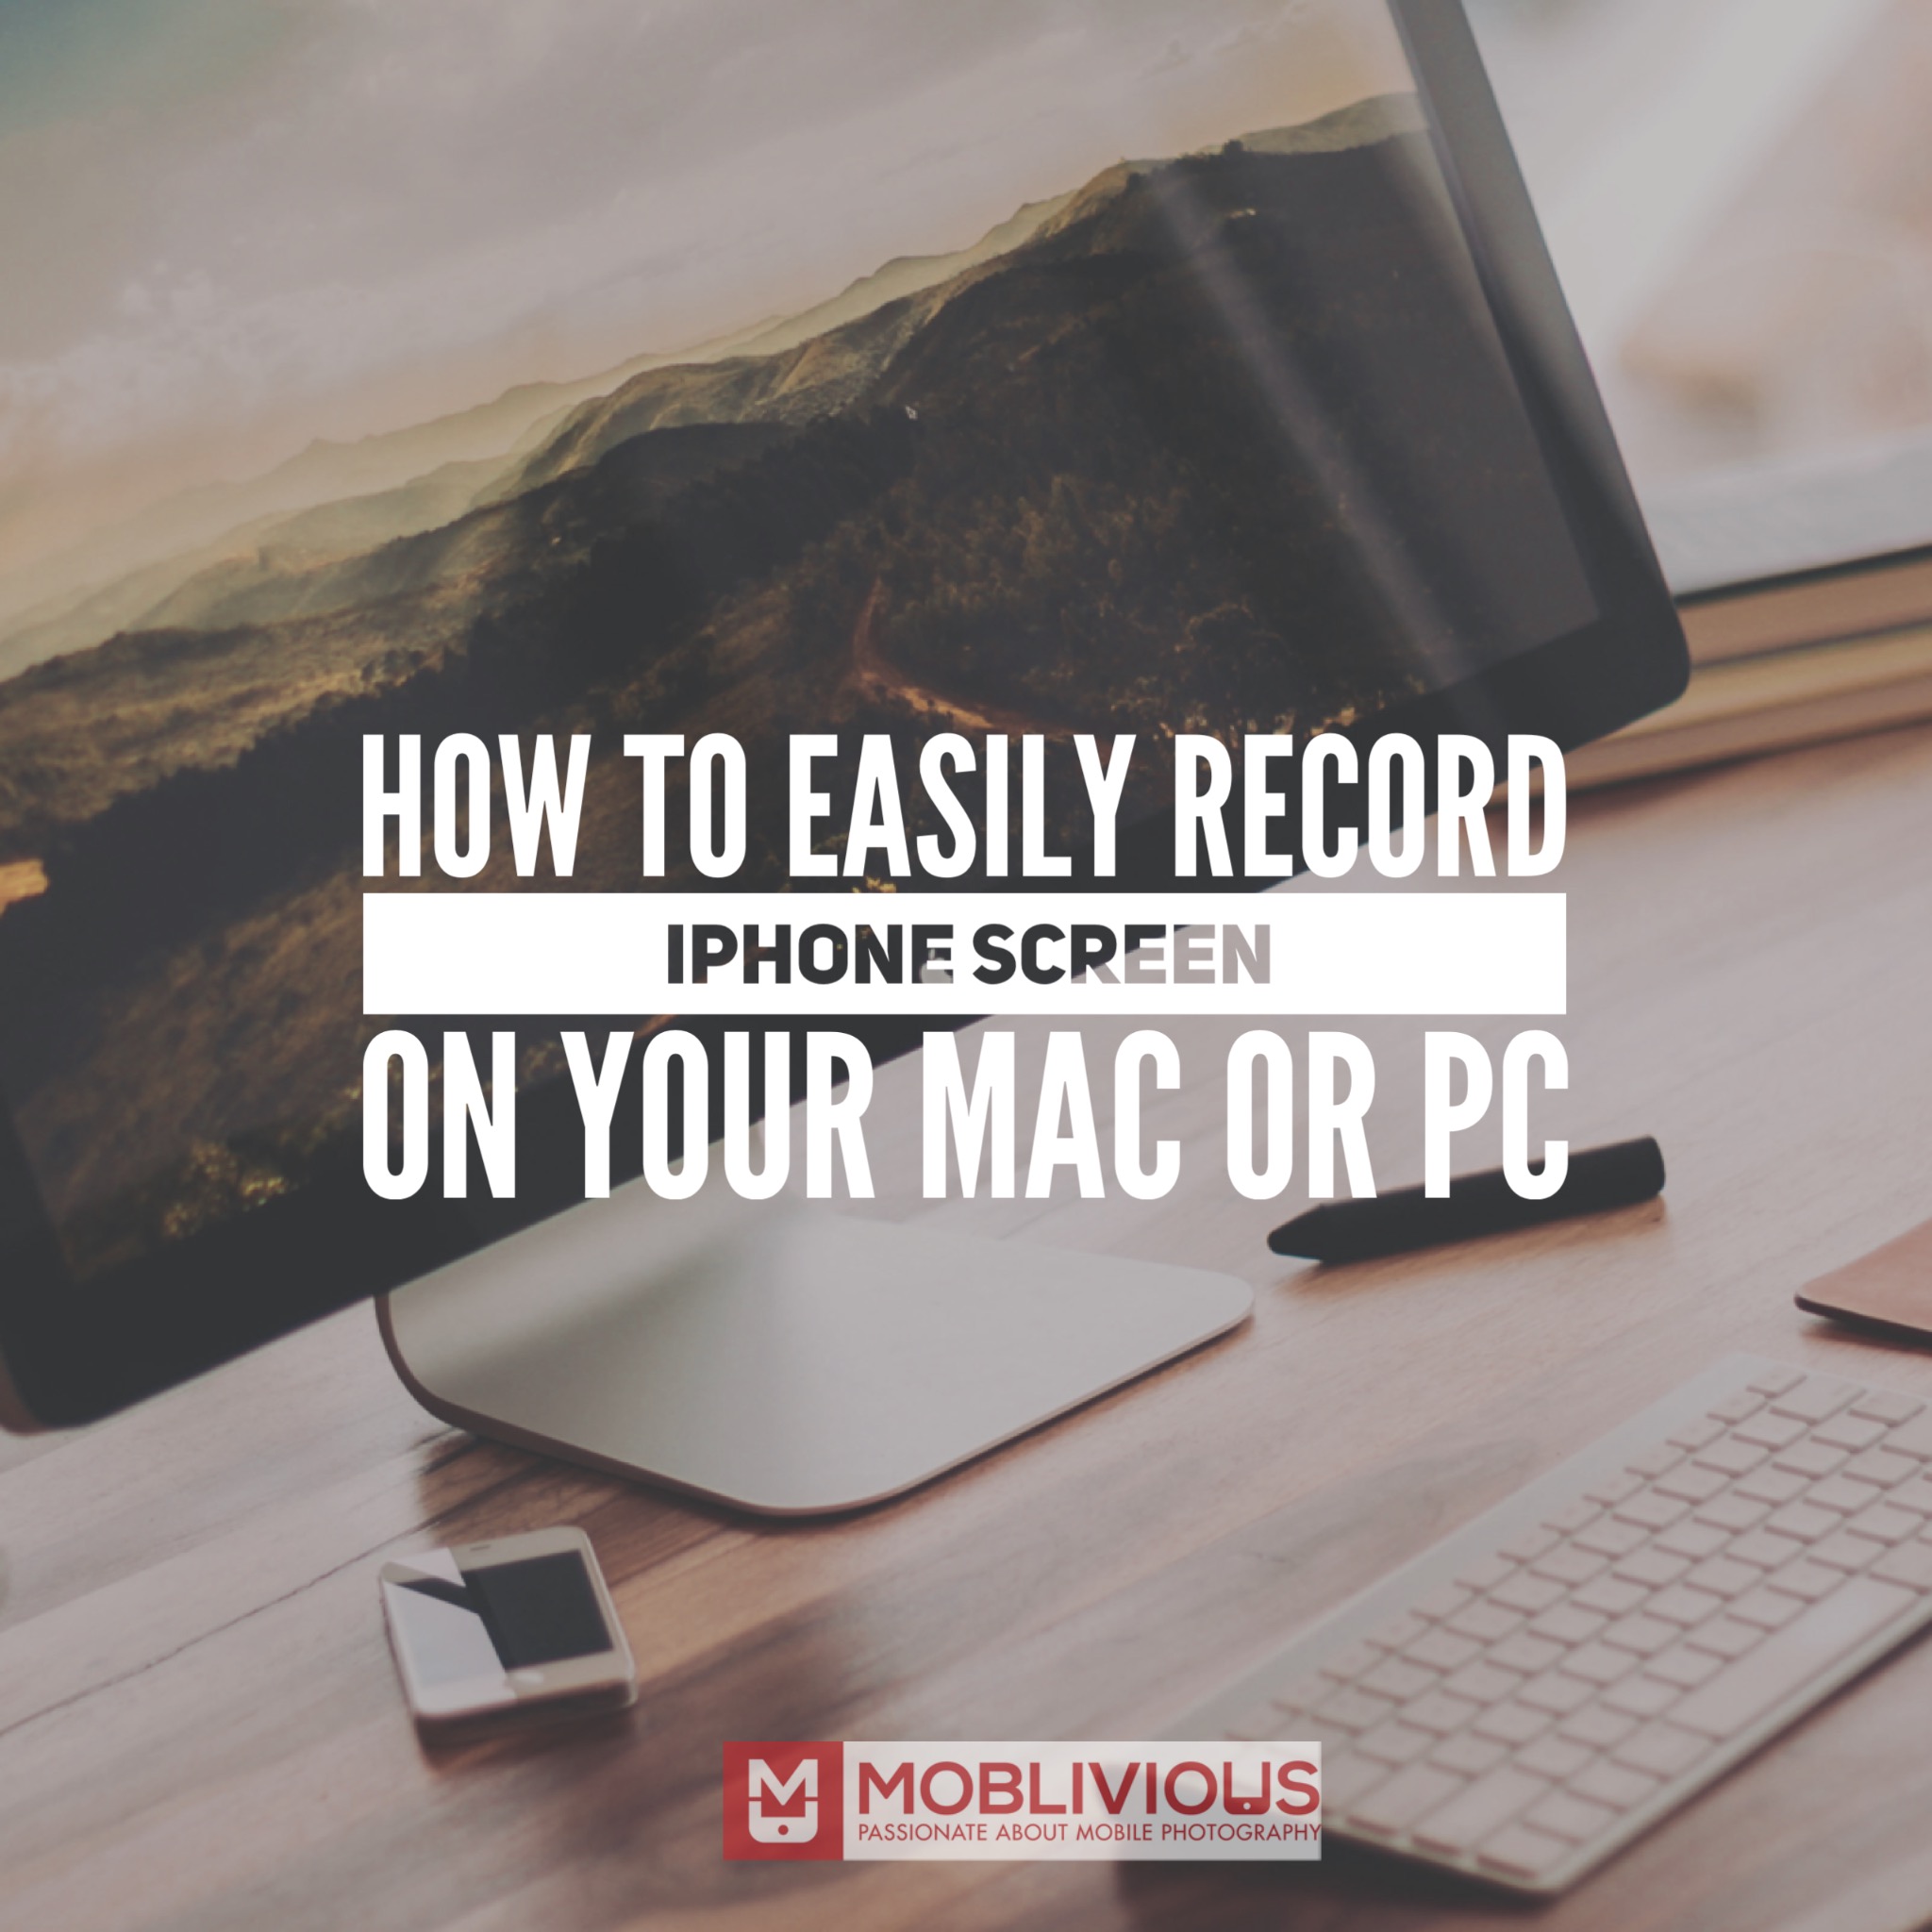 How to easily record iPhone Screen on your Mac or PC